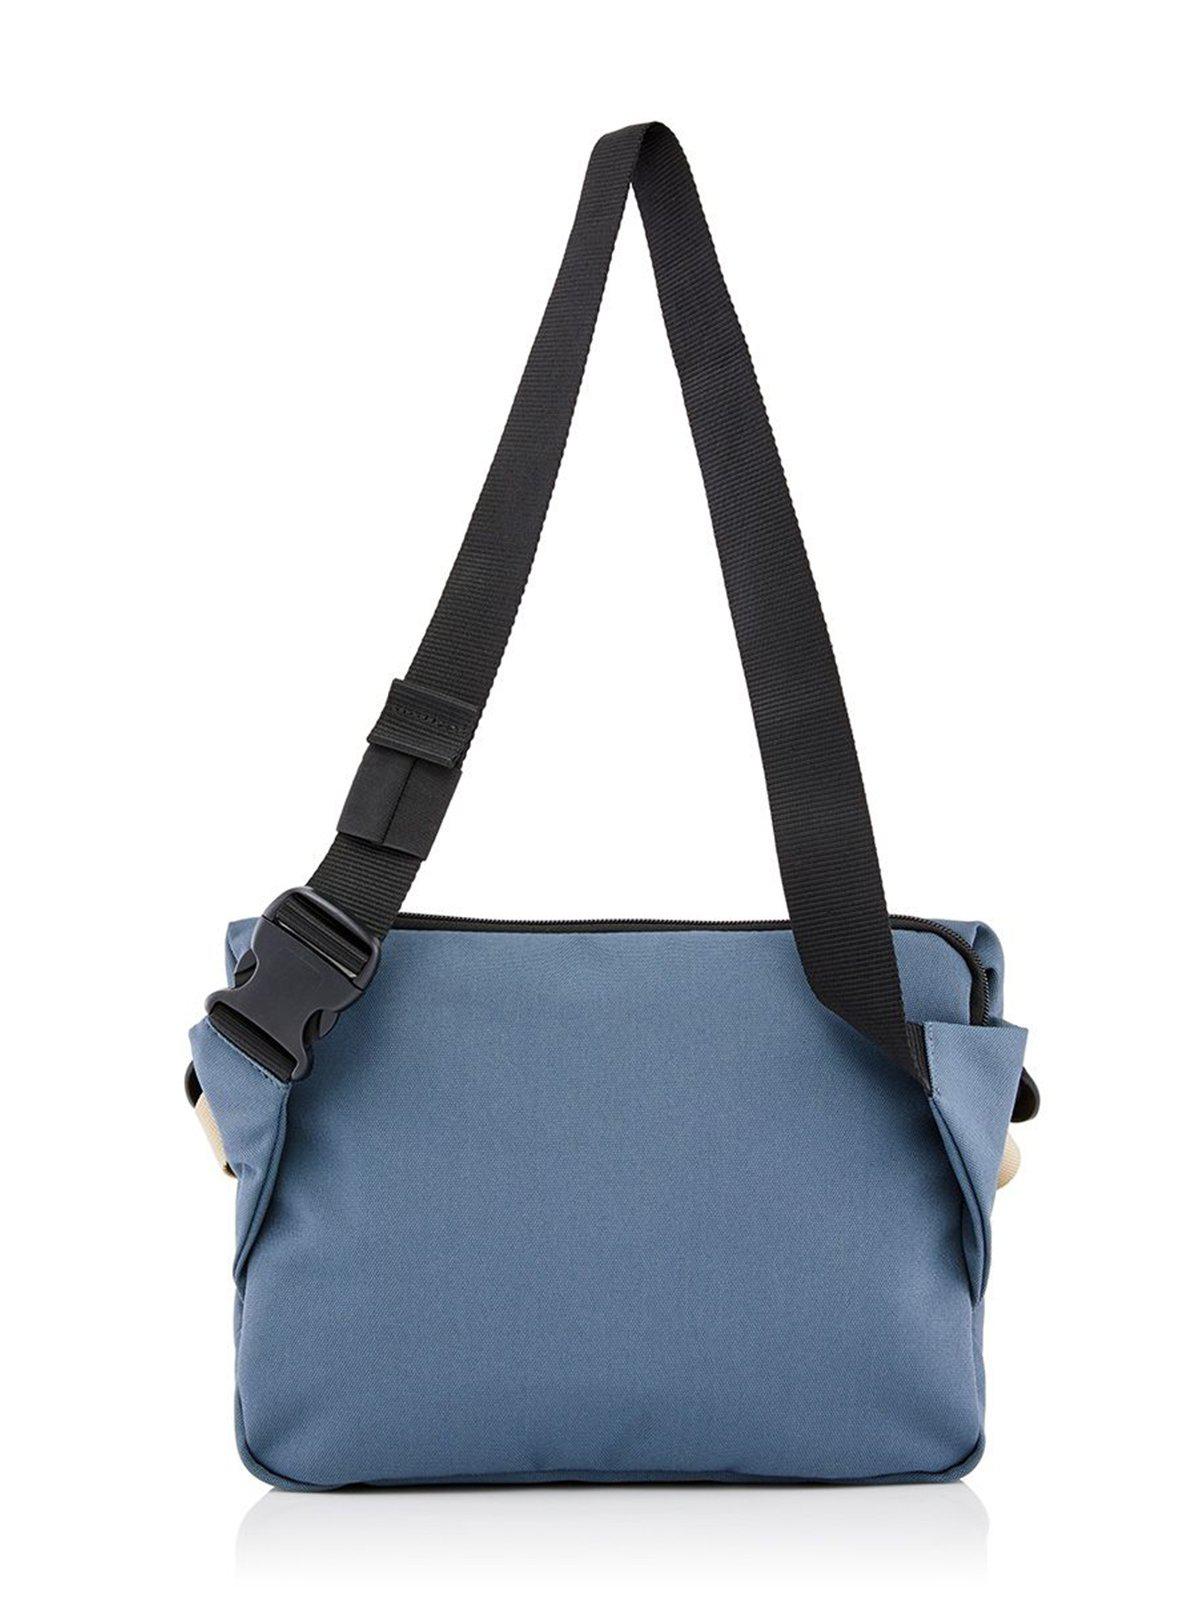 Crumpler Mini Rocket Roll Top Messenger Blue Lead - MORE by Morello Indonesia